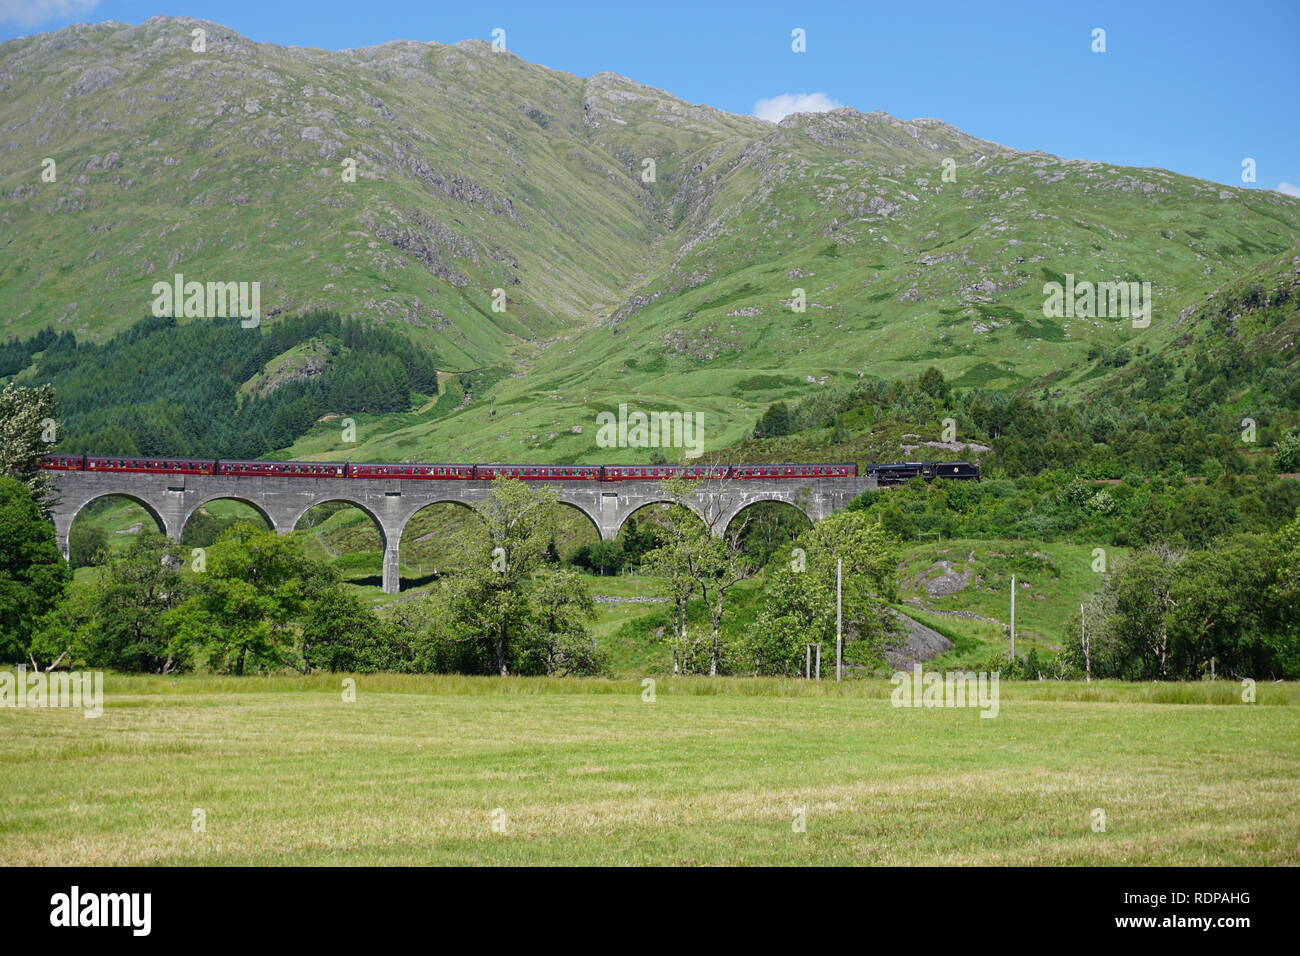 Viaduct in the Highlands, Scotland Stock Photo